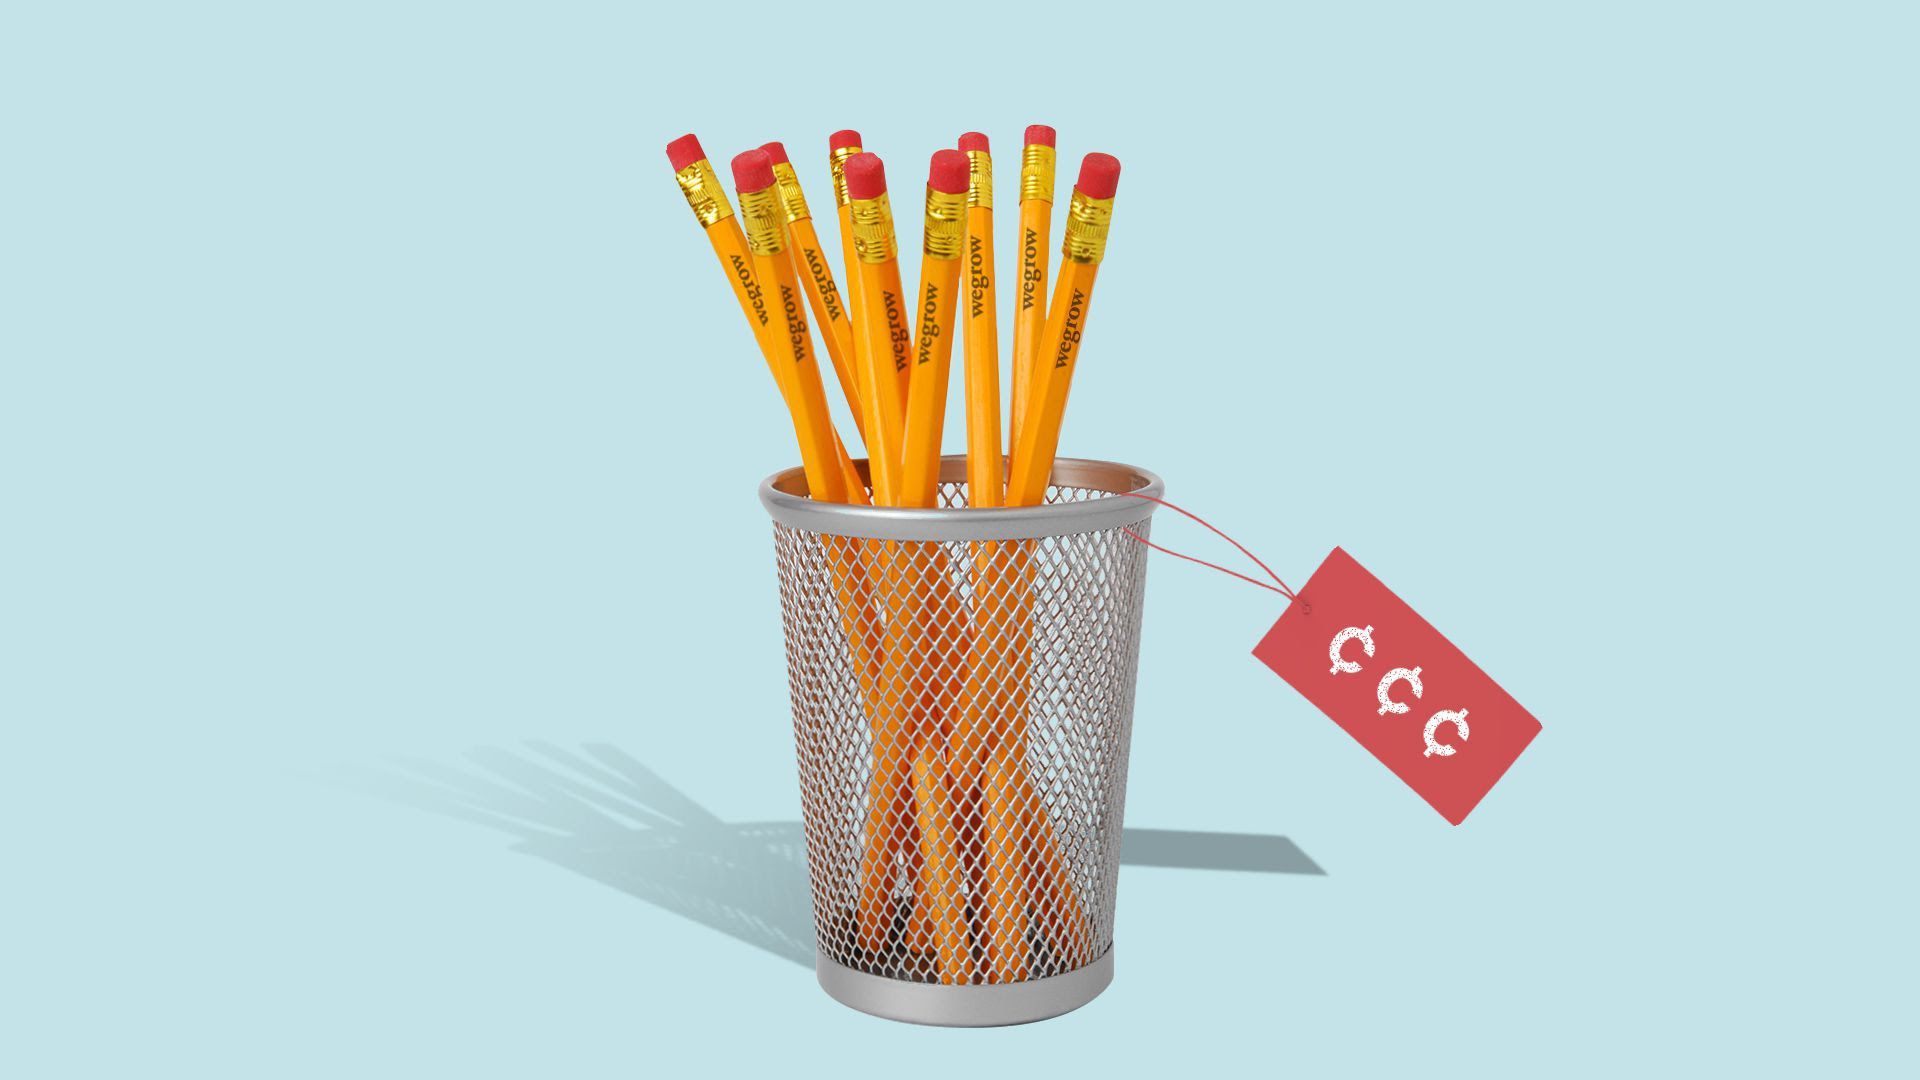 An illustration of pencils in a cup.